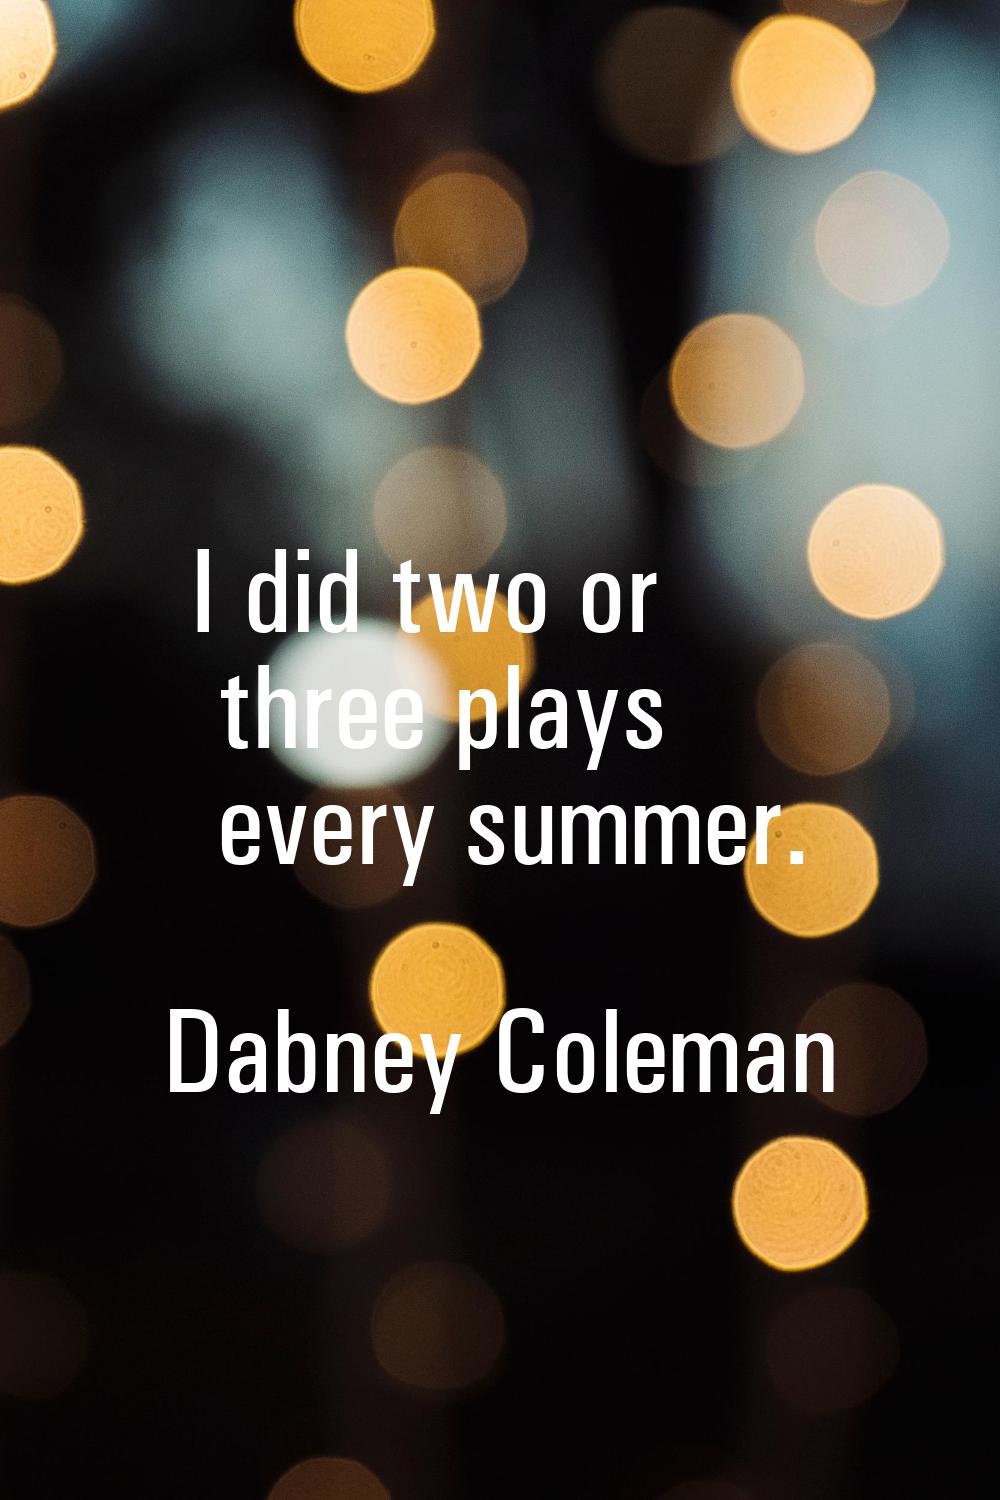 I did two or three plays every summer.